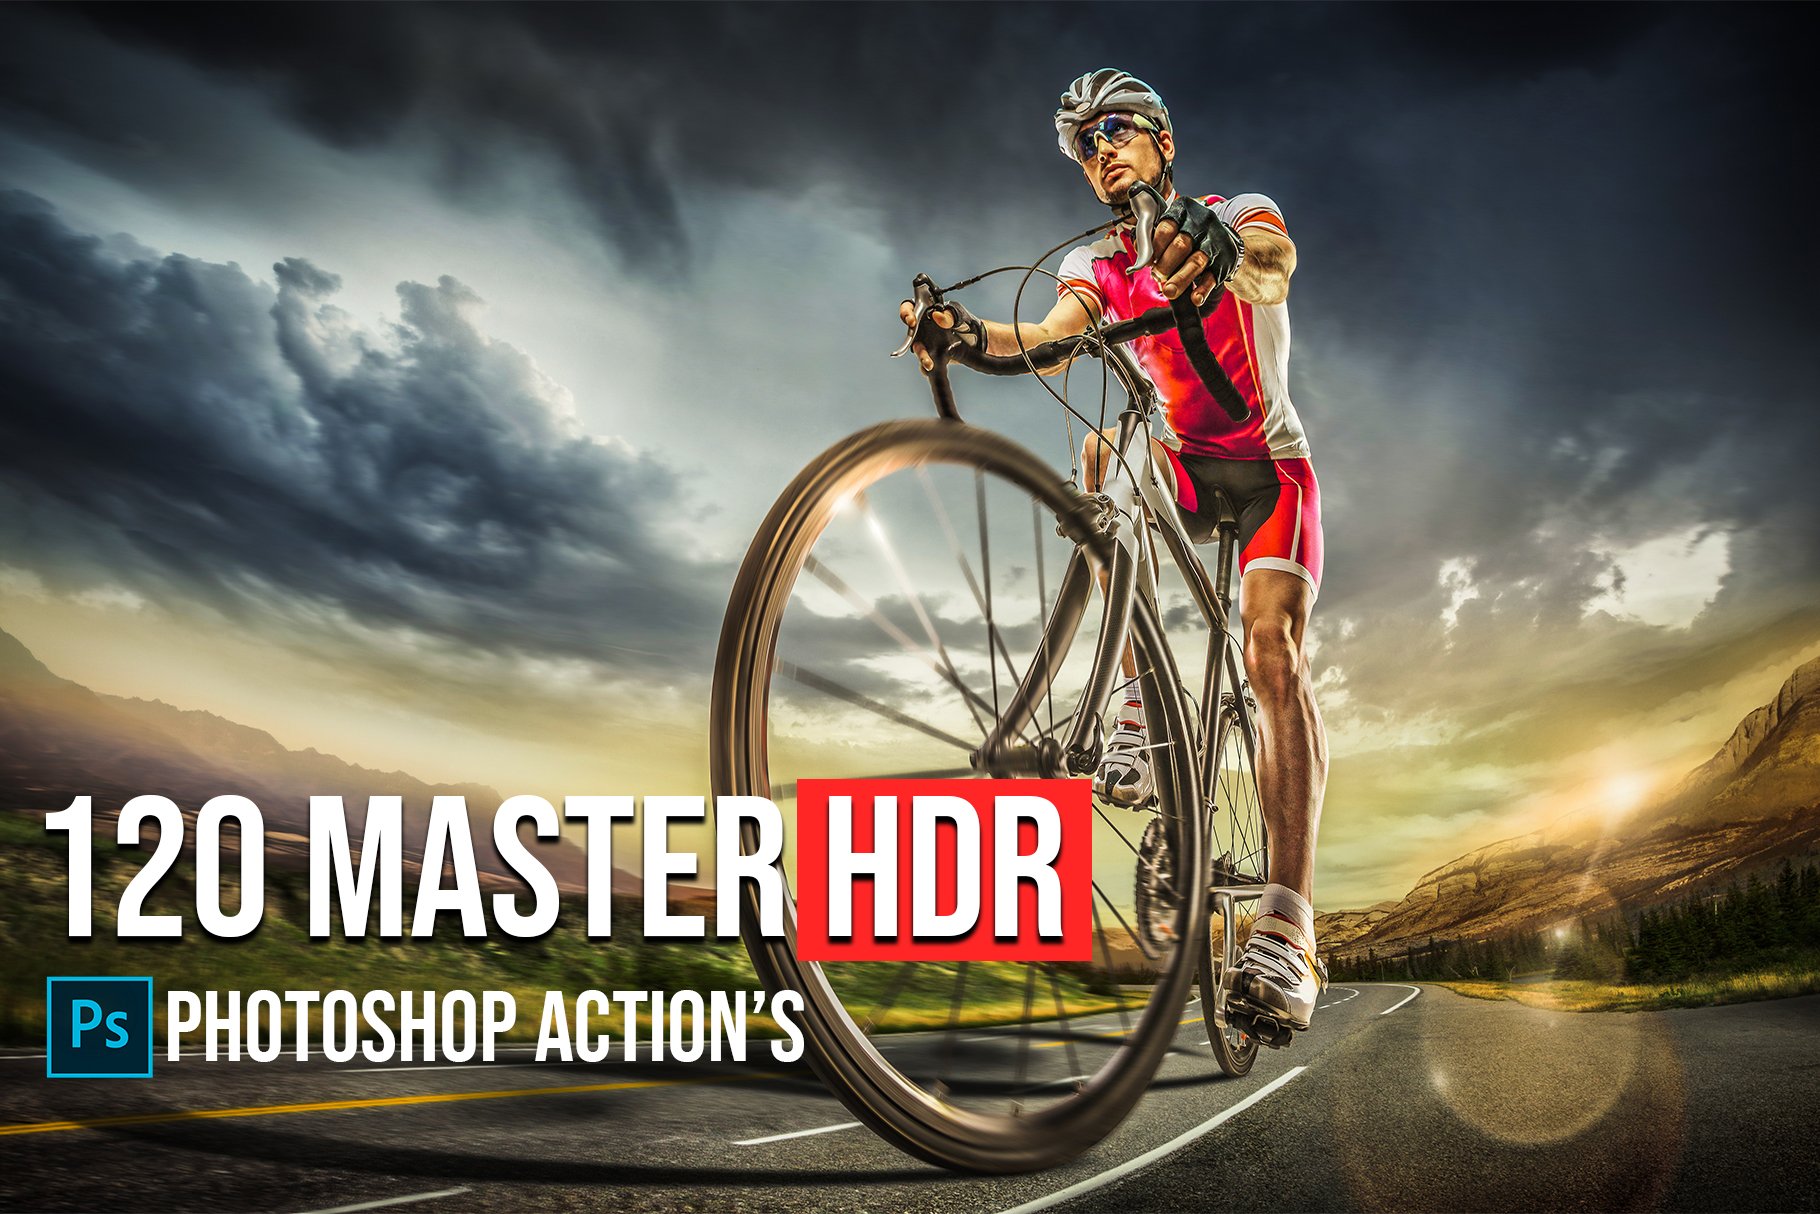 120 Master HDR Photoshop Actionscover image.